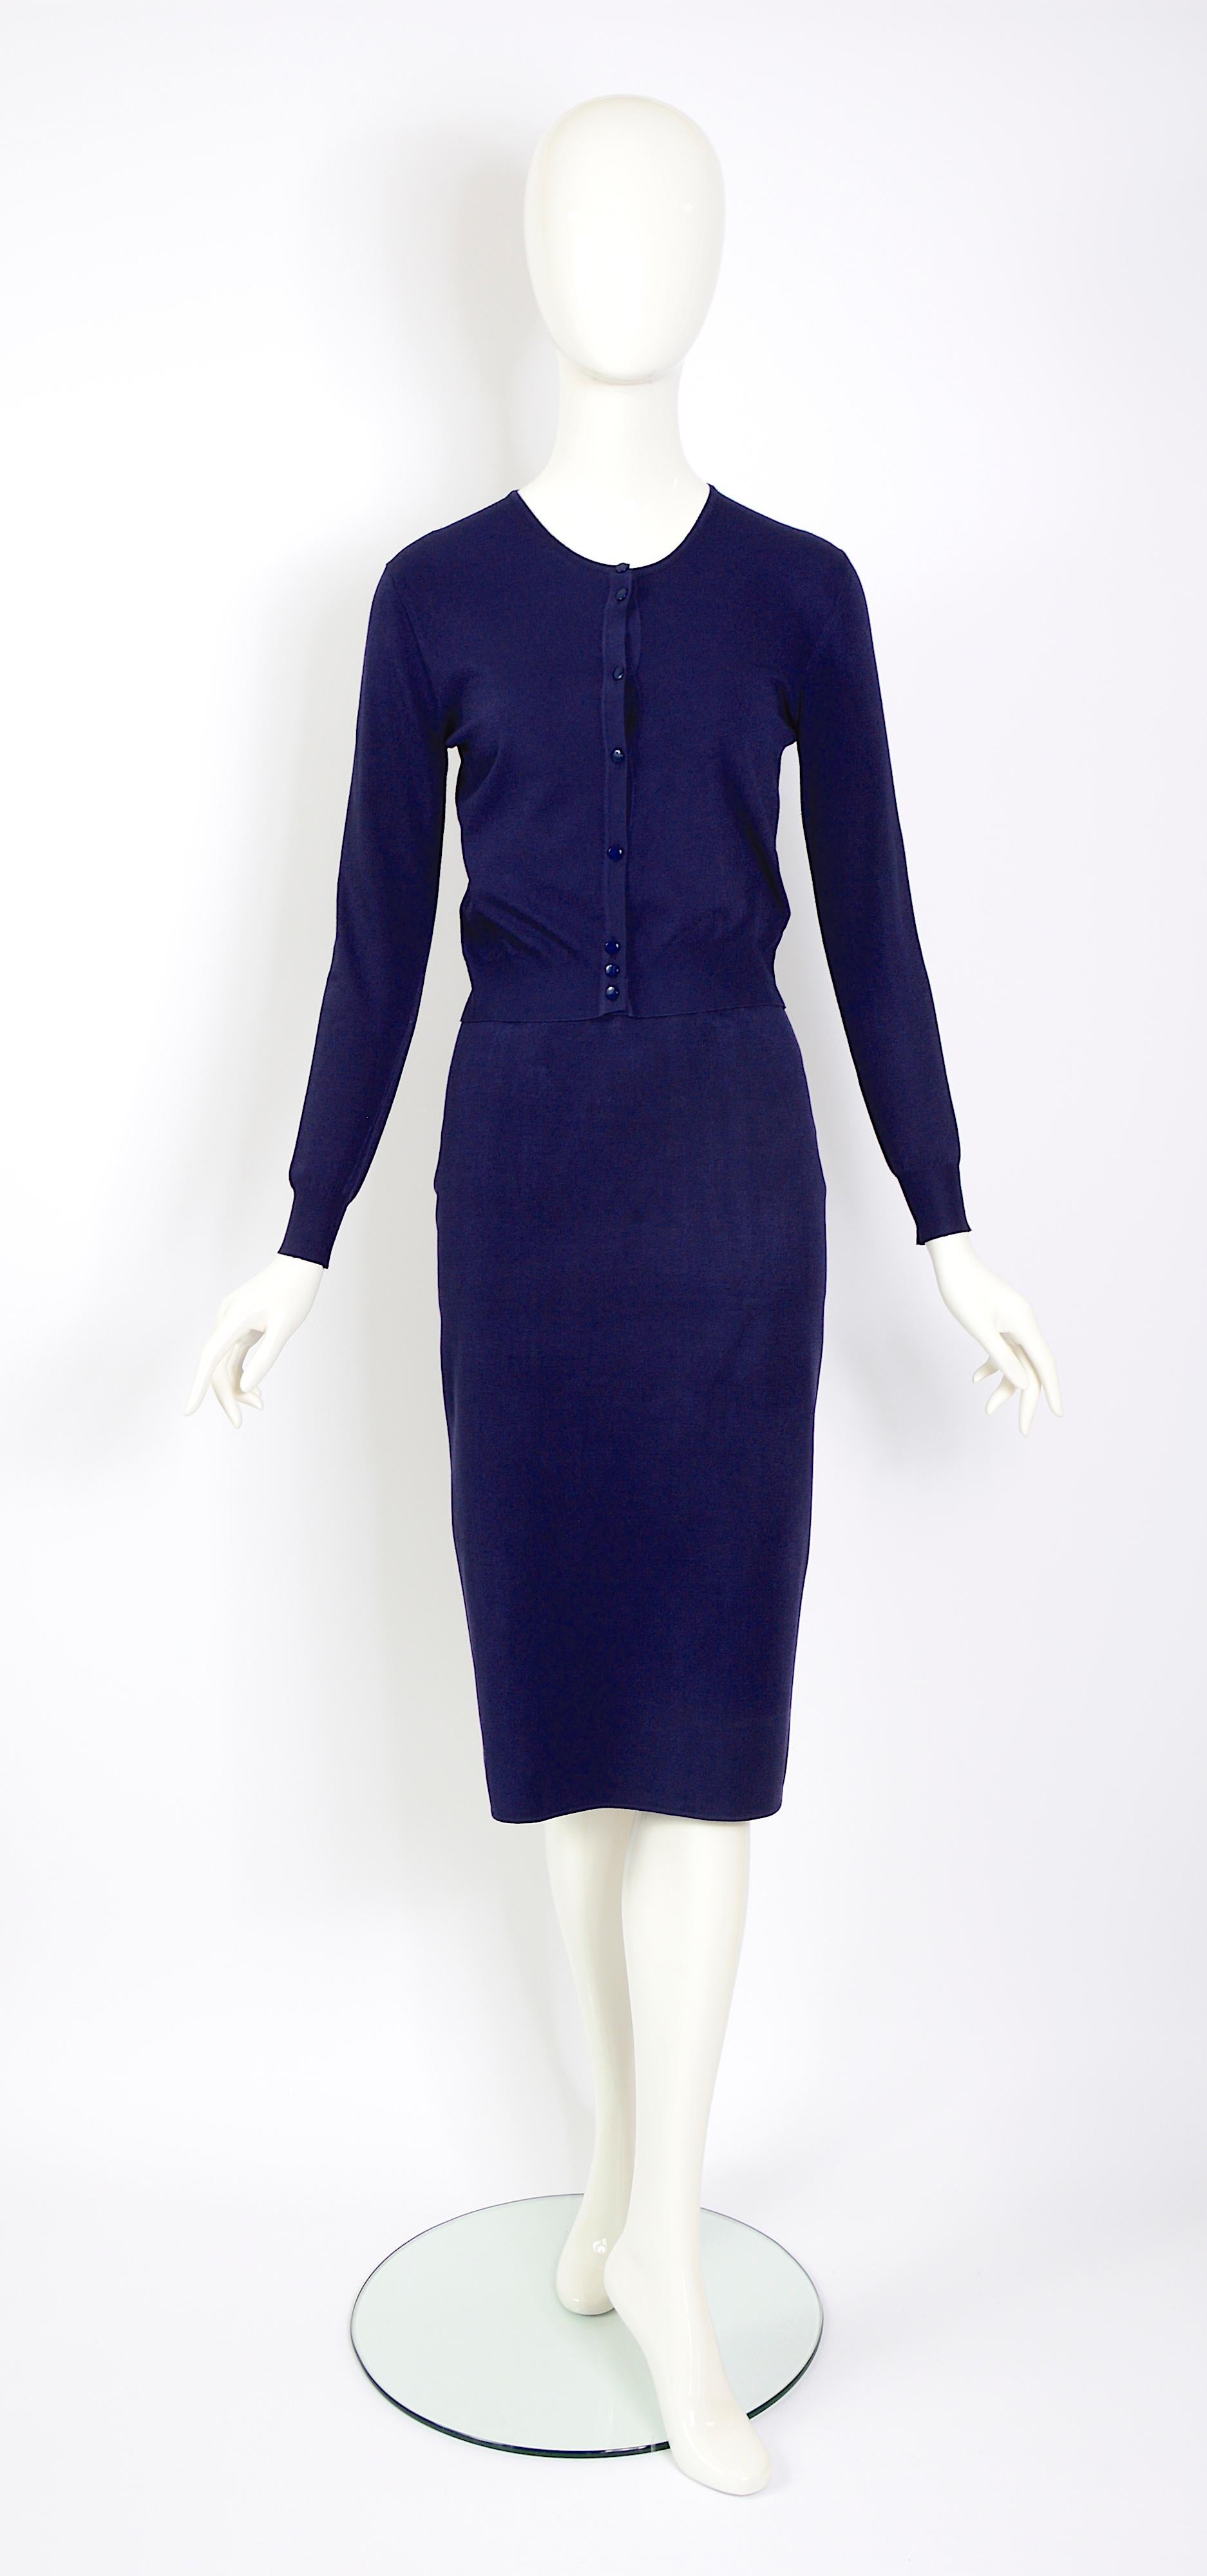 Absolutely stunning and in perfect condition, vintage cardigan & skirt set by Azzedine Alaia. Iconic body con skirt with matching cardigan made in a midnight blue stretch viscose mix knit.

Labeled size Small, but can accommodate a variety of sizes